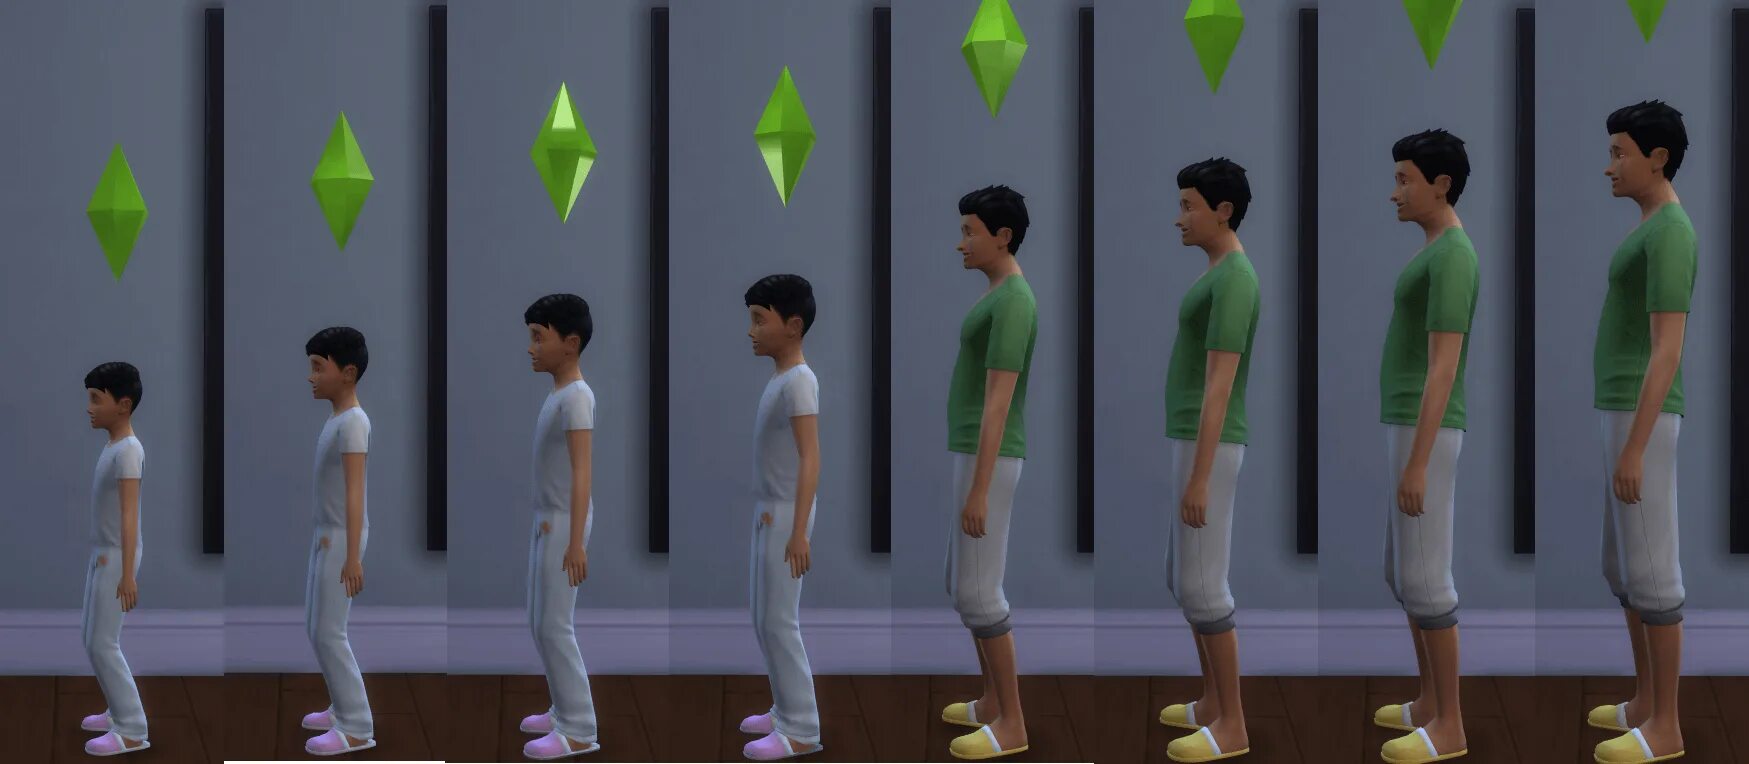 ATF Mods SIMS 4. ATF children Mod SIMS 4. SIMS 4 мод на рост.